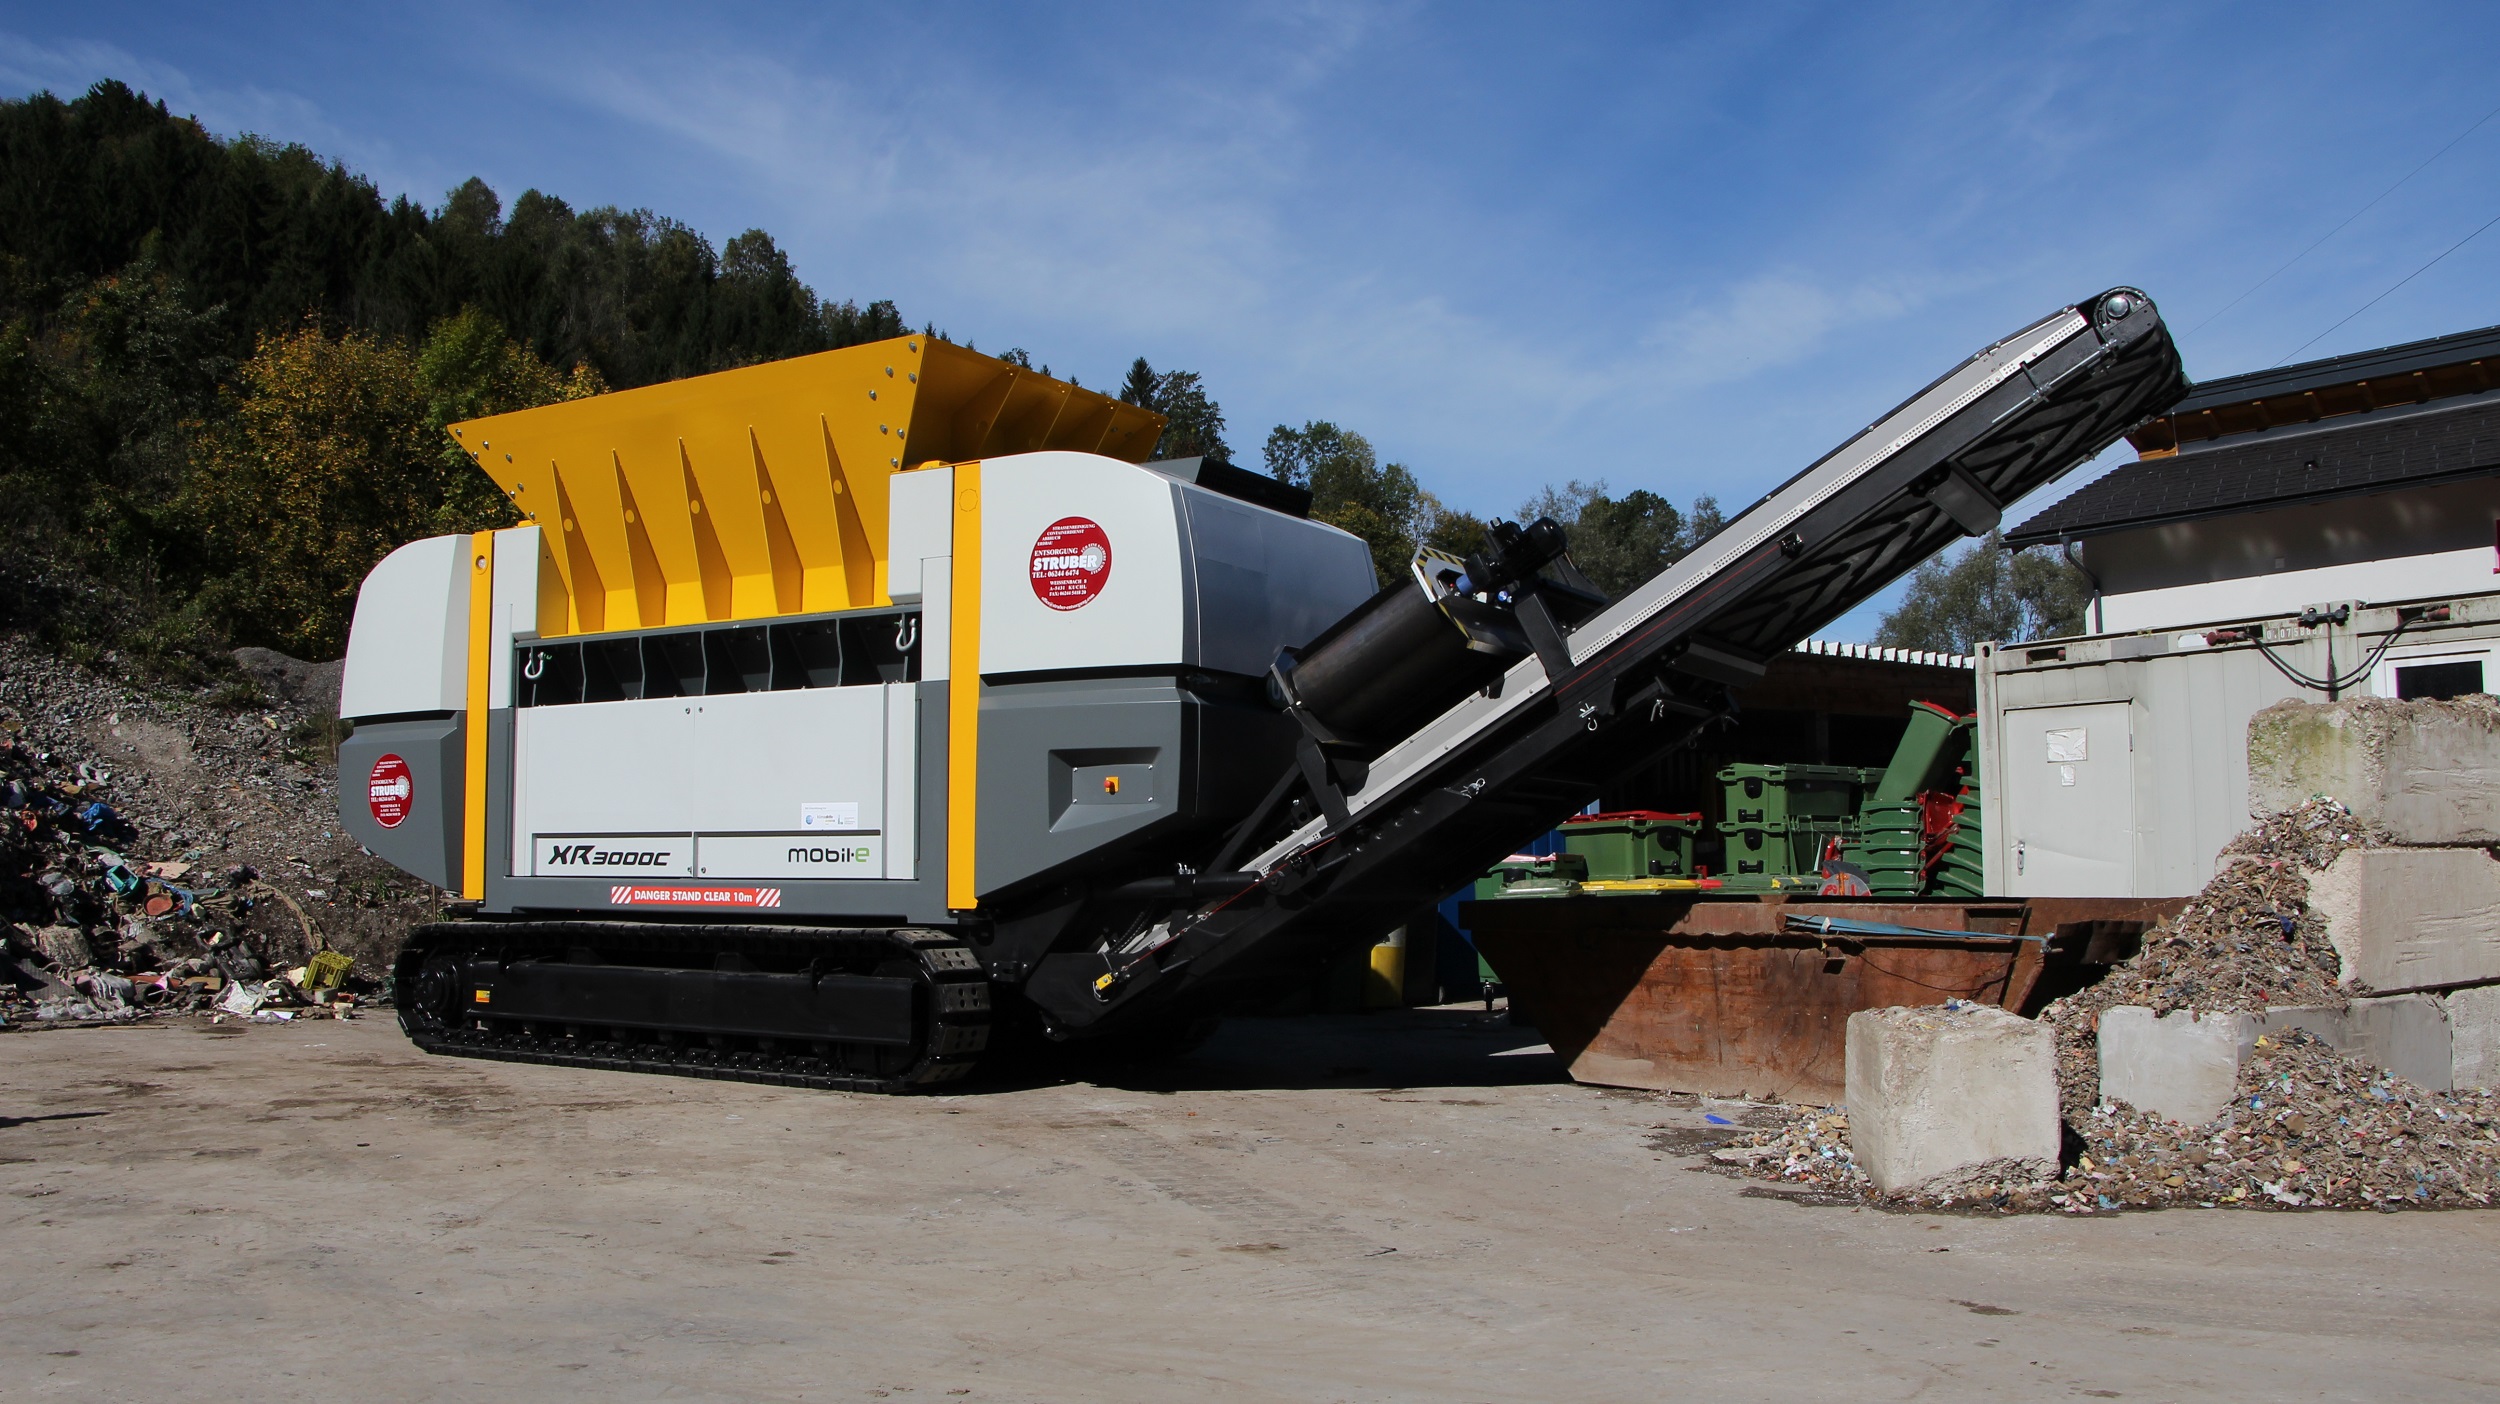 Mobile shredder supports Austrian firms passion for carbon neutral waste management